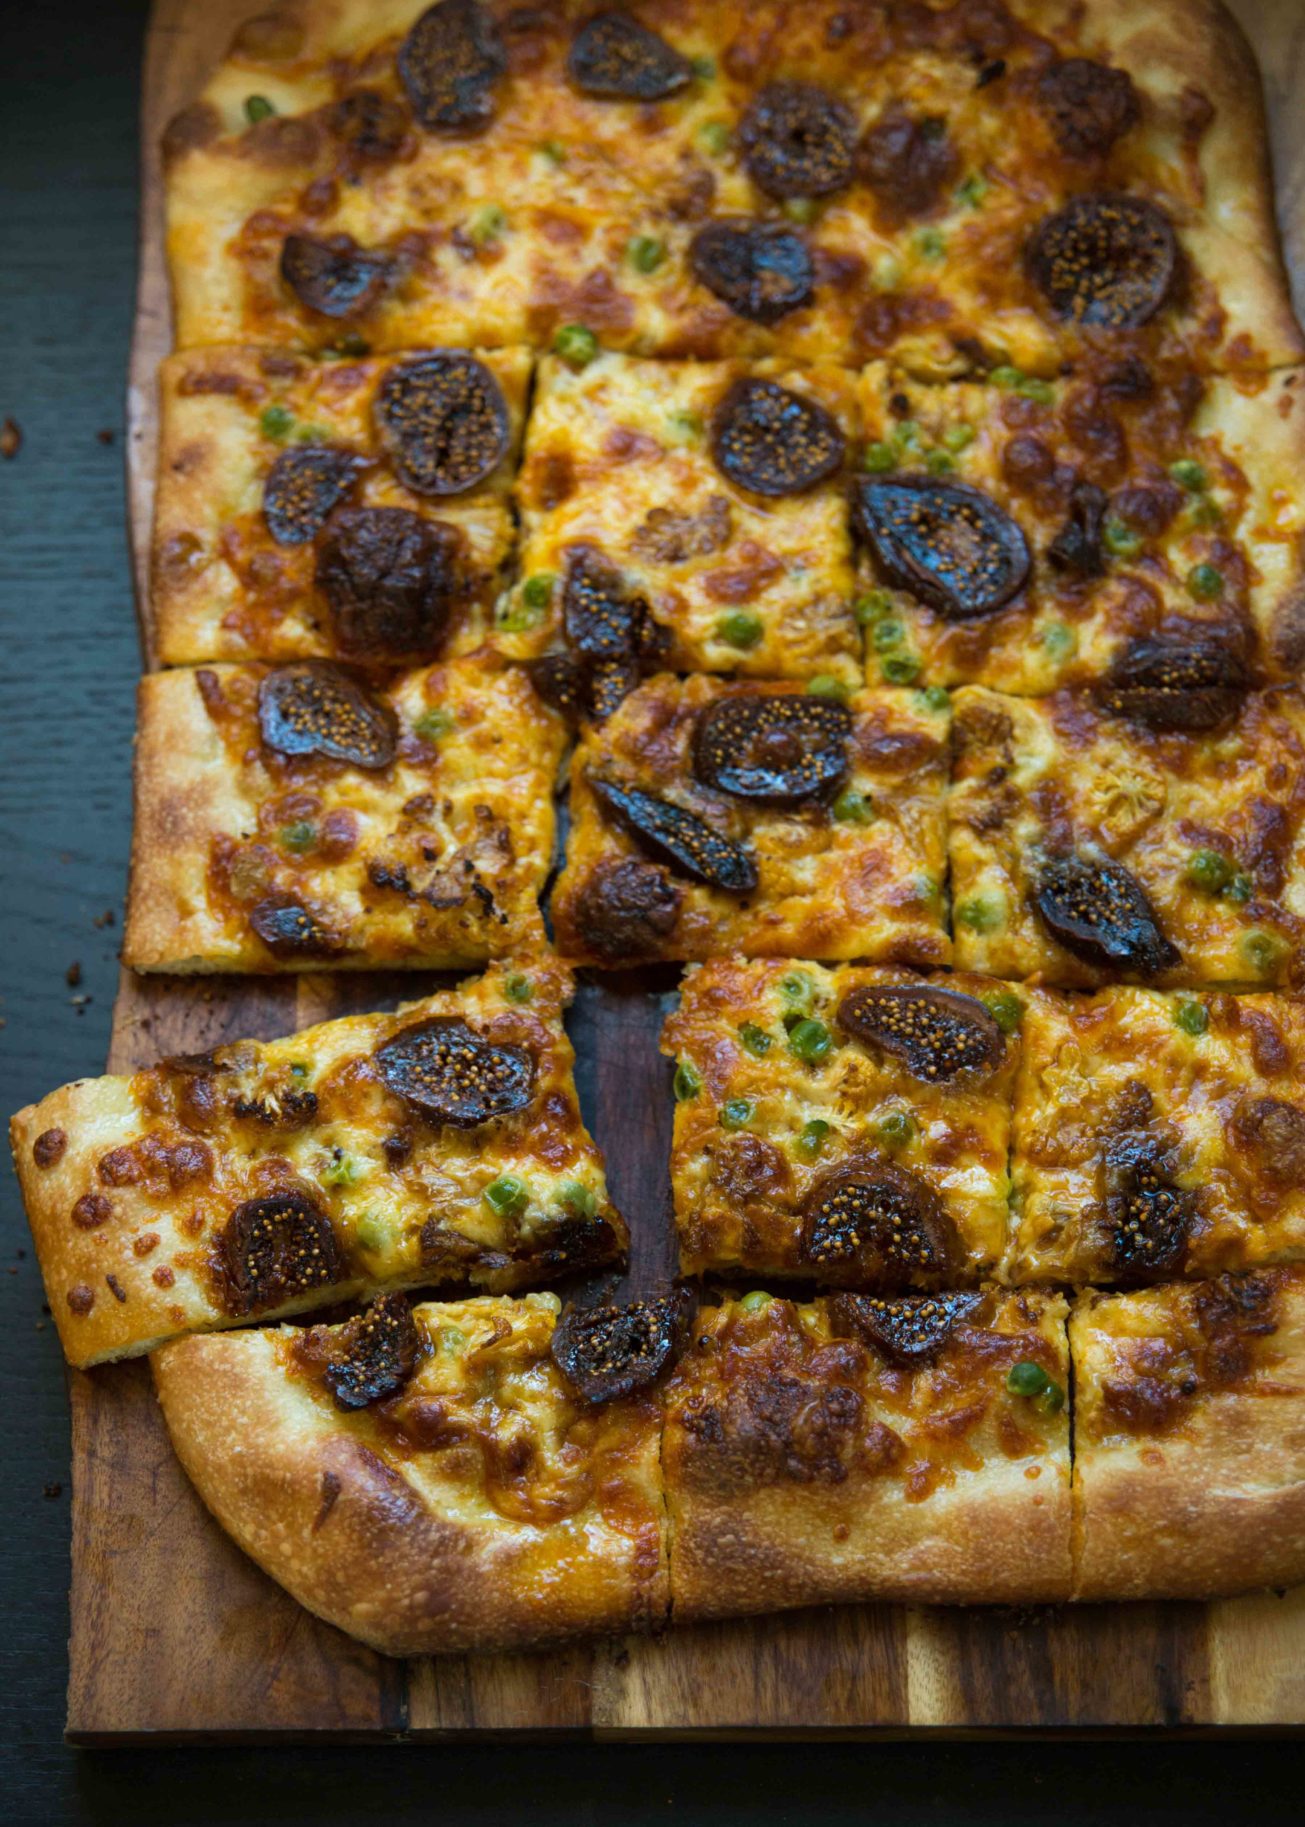 Using store-bought pizza dough means any night can be pizza night in our Curry Pizza with Figs and Cauliflower.